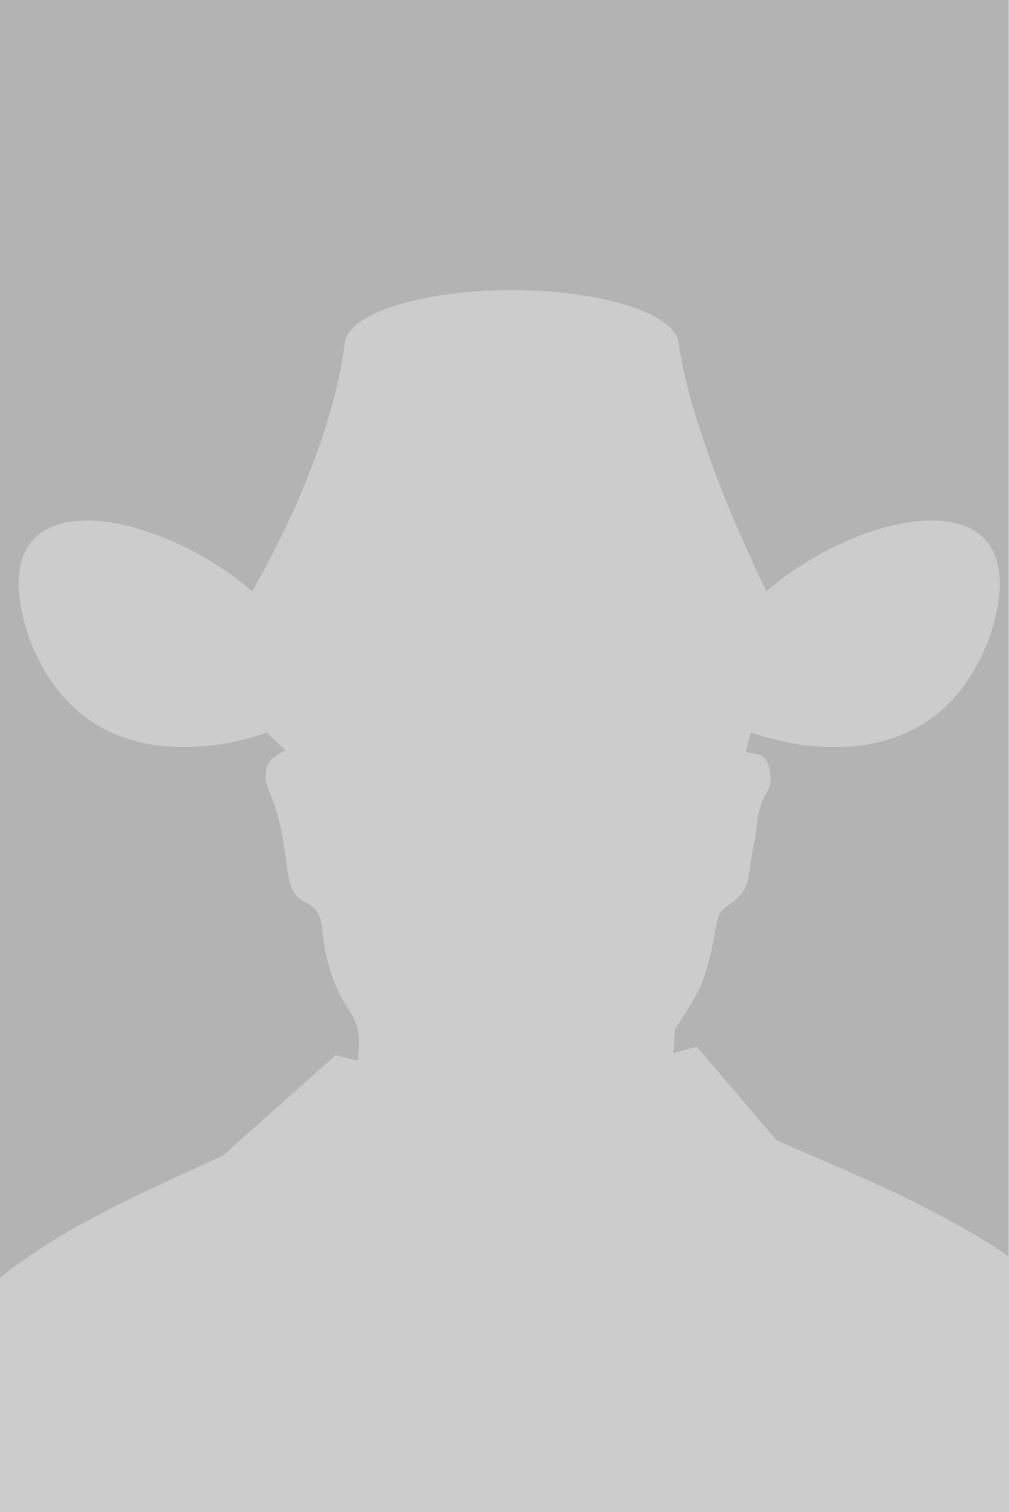 Image depicting a missing headshot of a Cowboy State Daily team member.